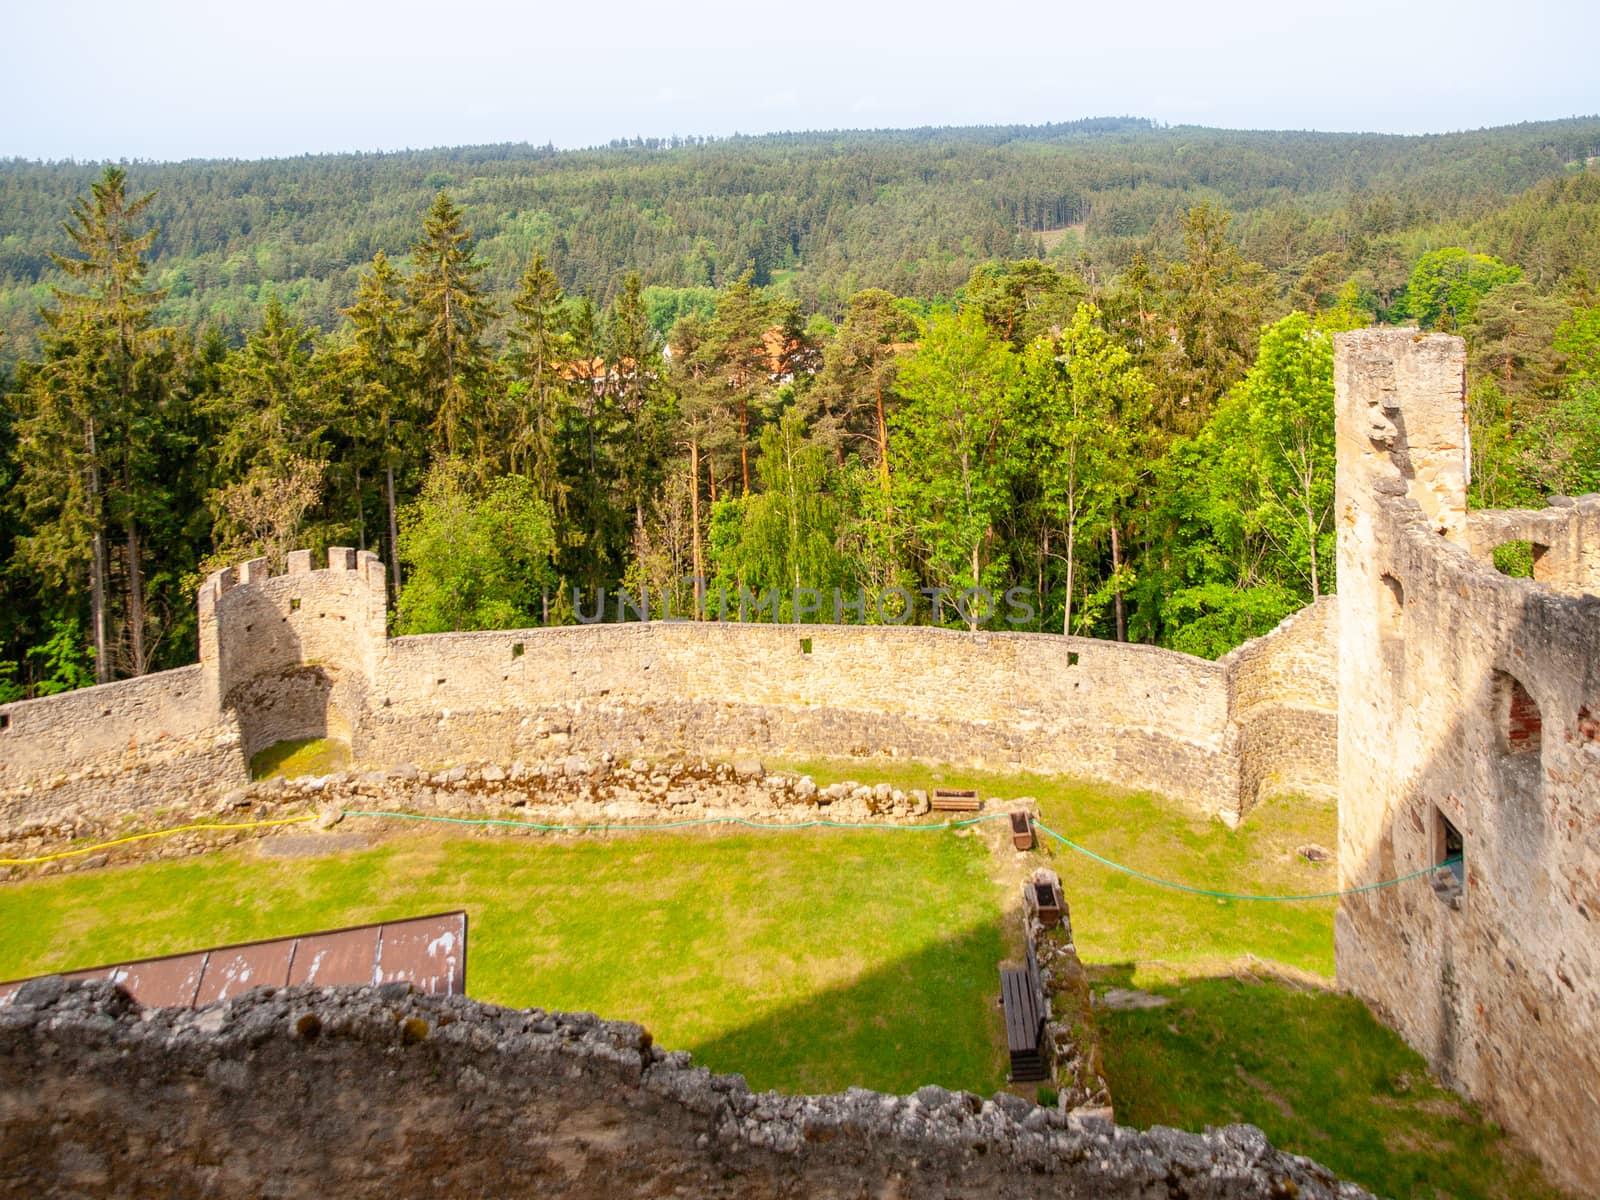 Landstejn Castle Ruins. View of ruined walls from castle tower.